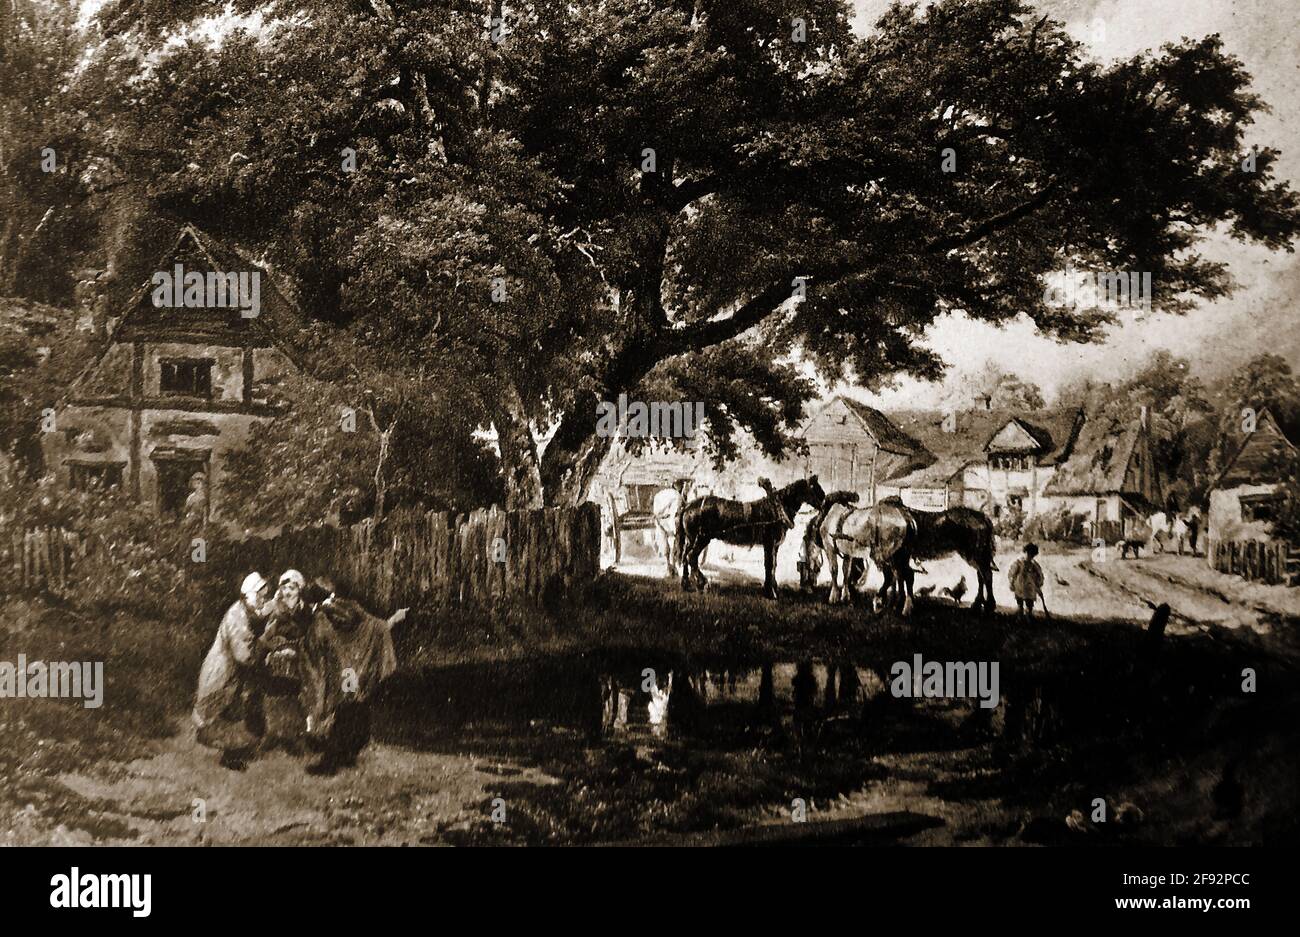 A typical scene in an English village in the 1700's showing women gossiping near the village pond where horses are being watered. Stock Photo